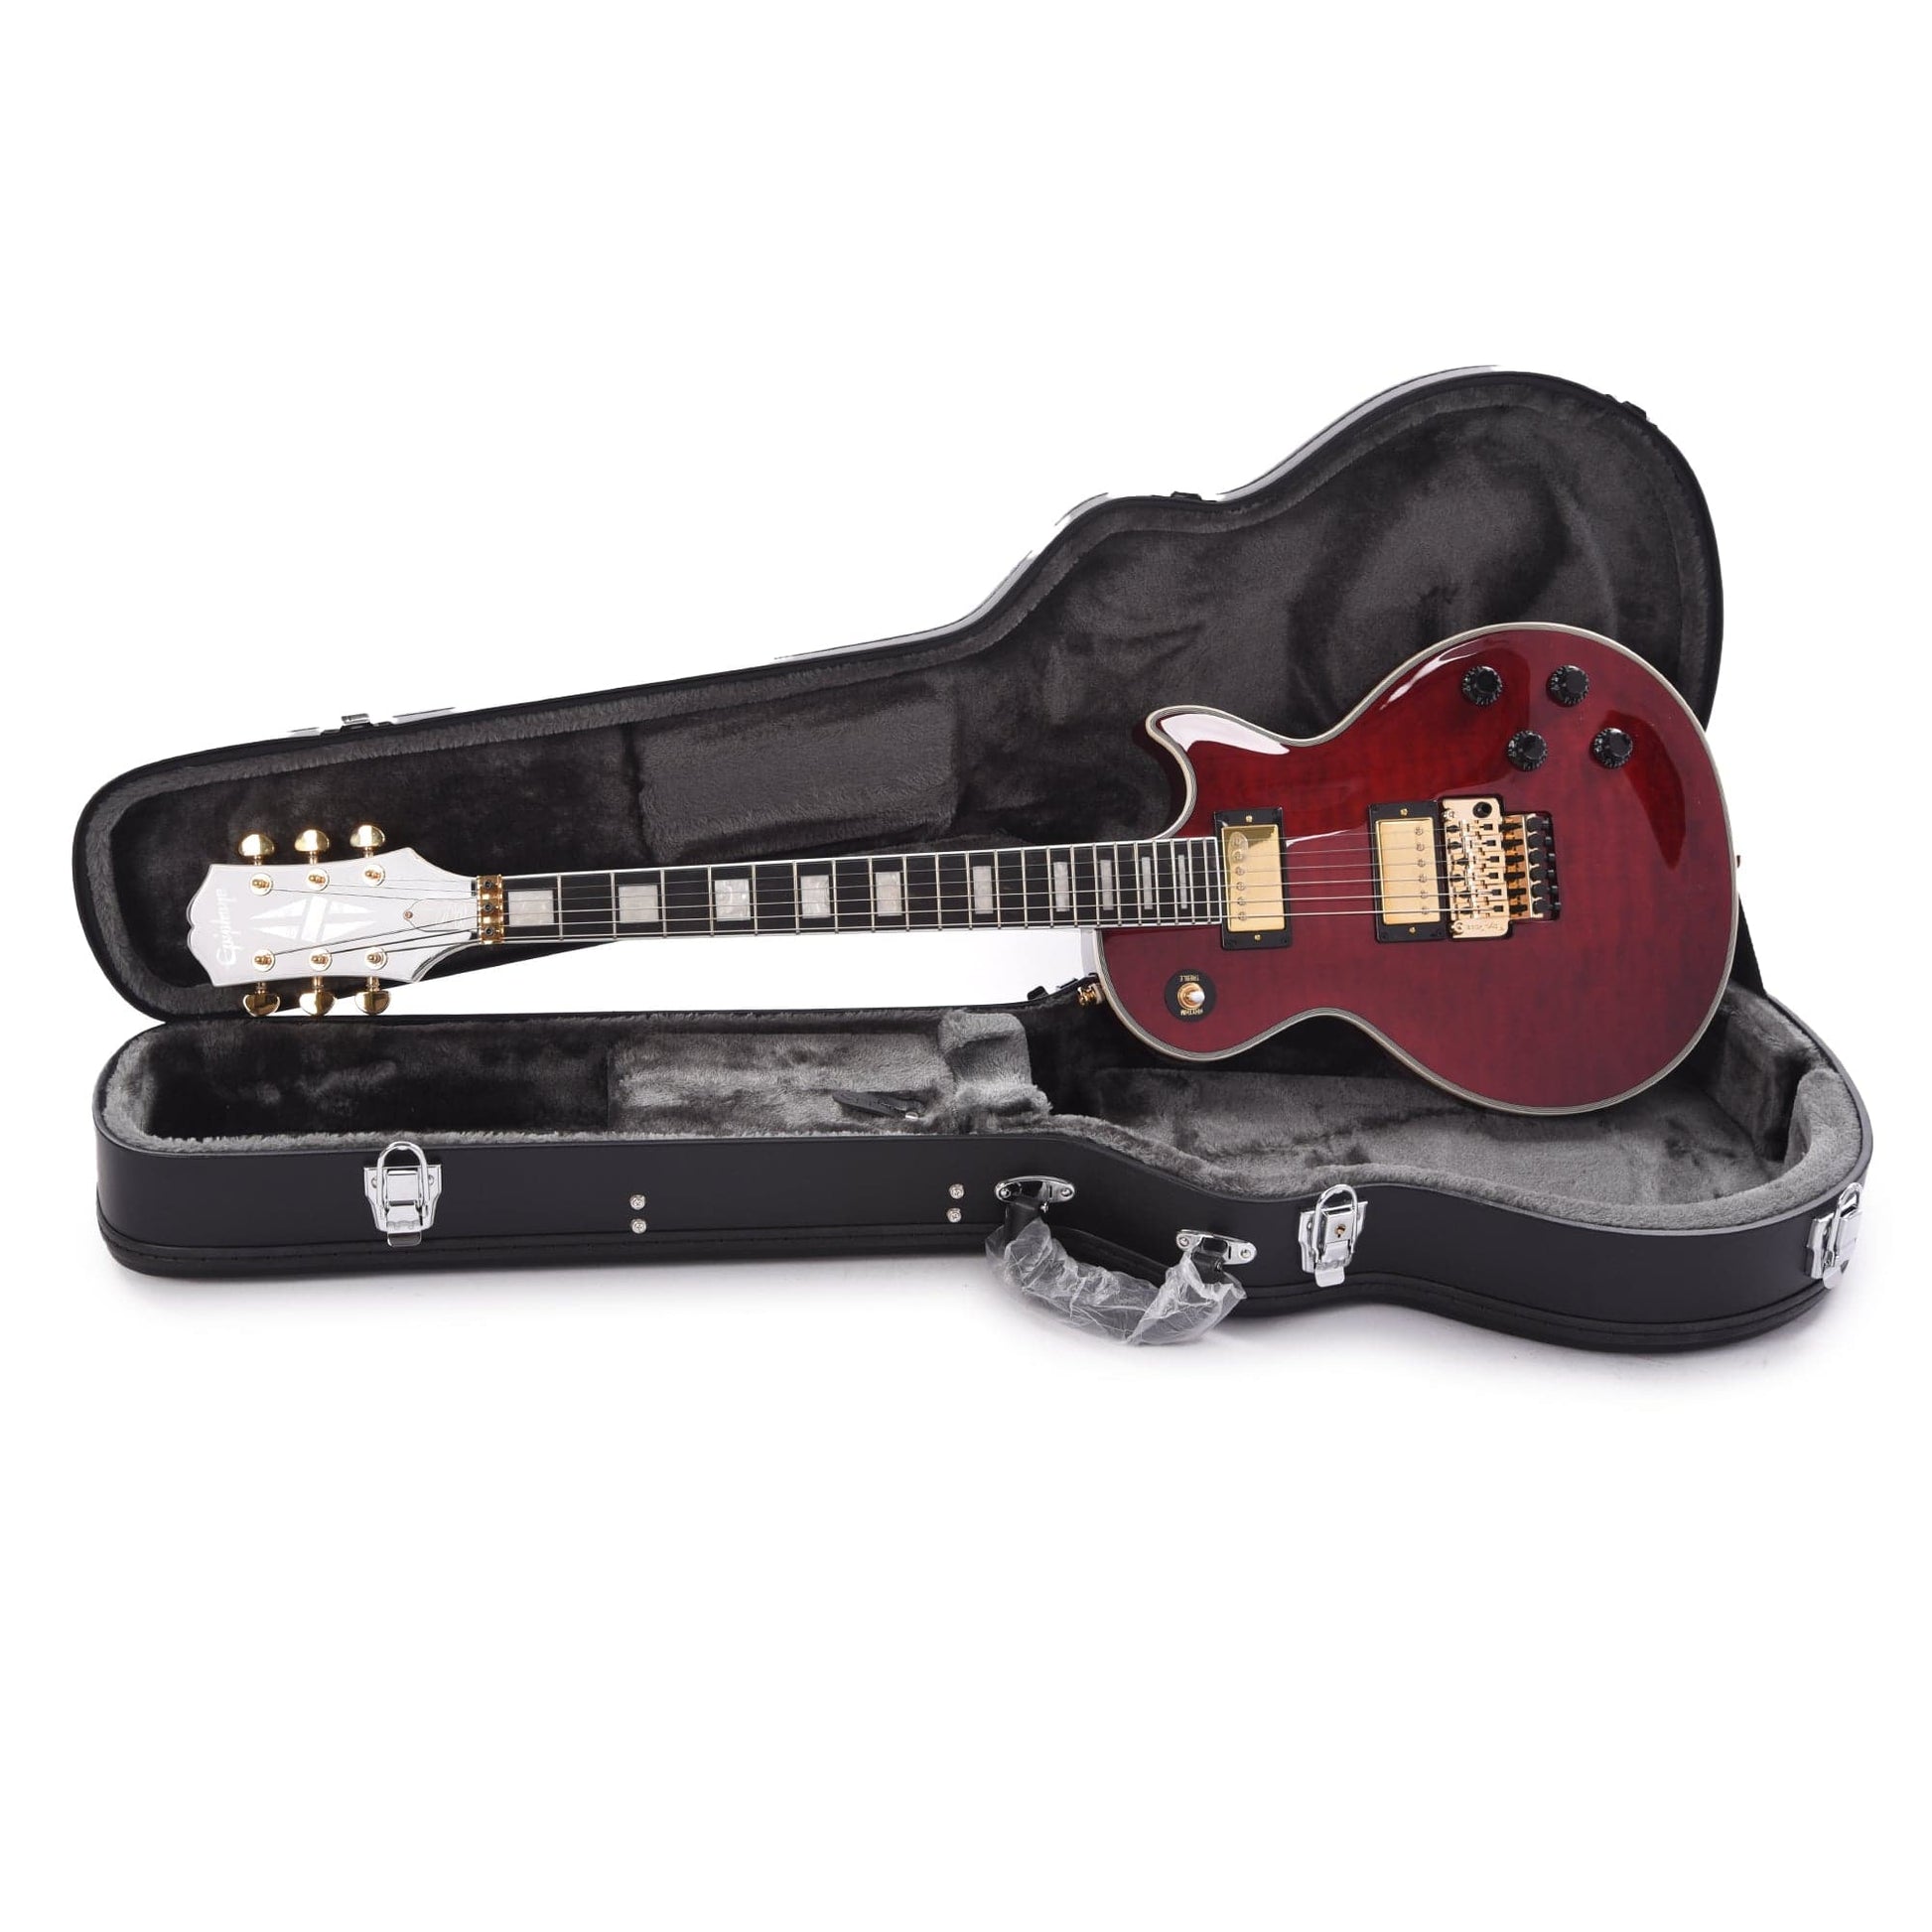 Epiphone Artist Alex Lifeson Les Paul Custom Axcess Quilt Ruby Electric Guitars / Solid Body